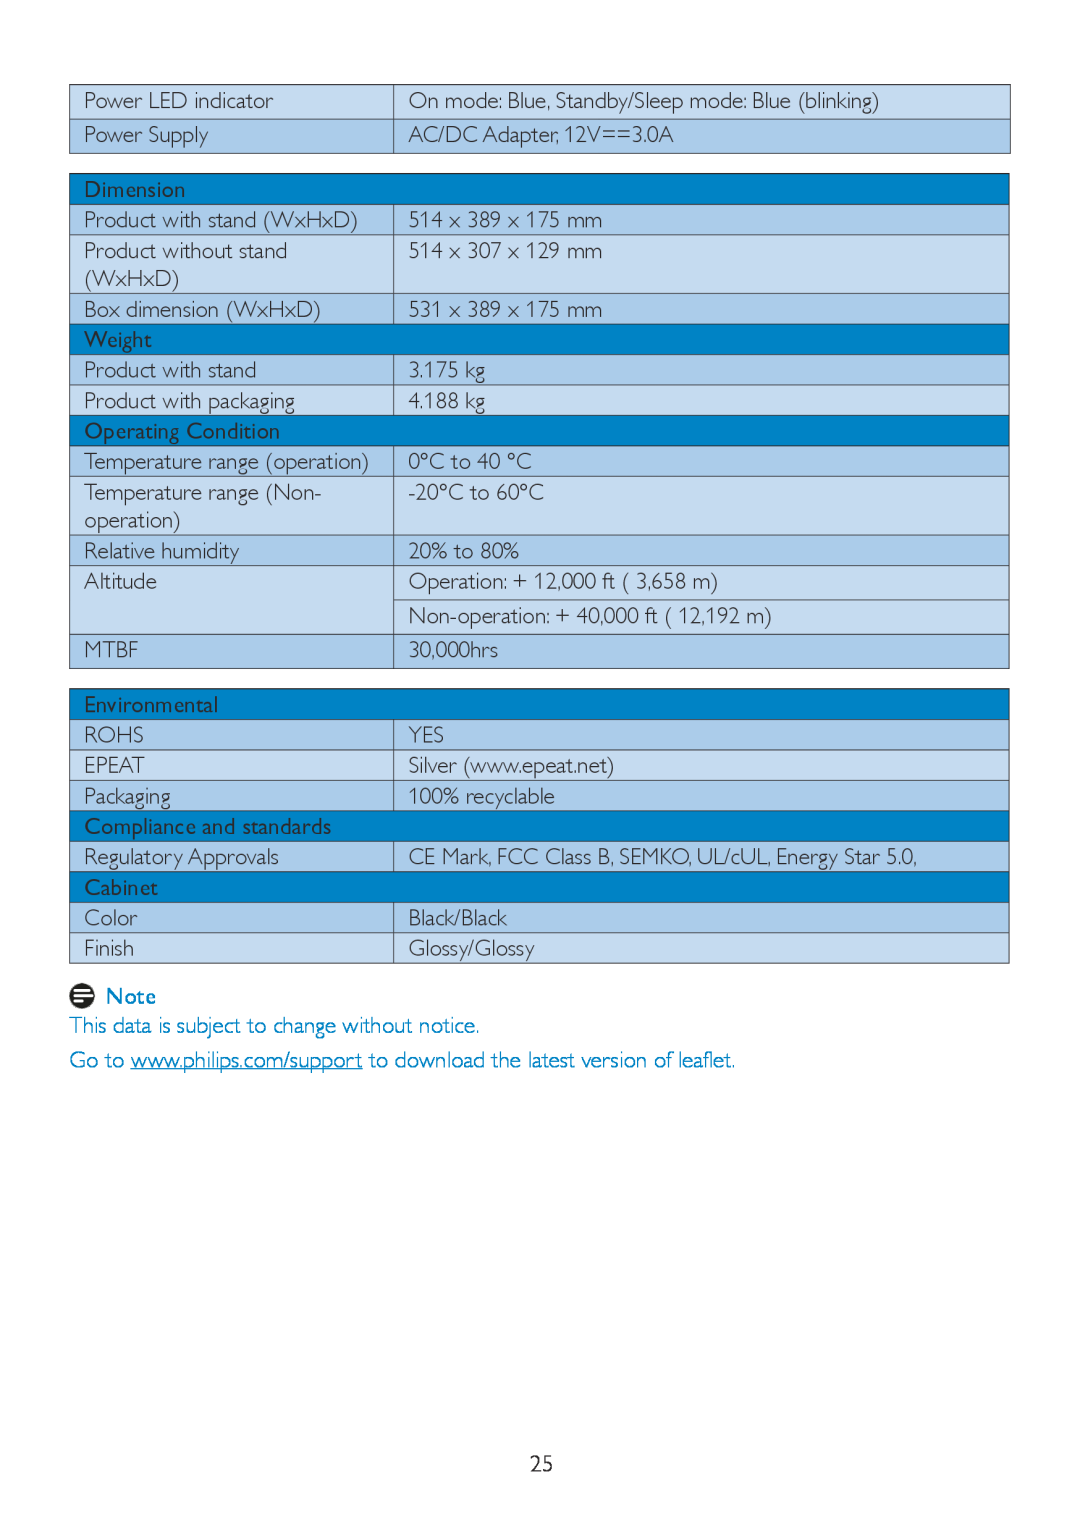 Philips 224CL2 user manual This data is subject to change without notice, Temperature range operation 